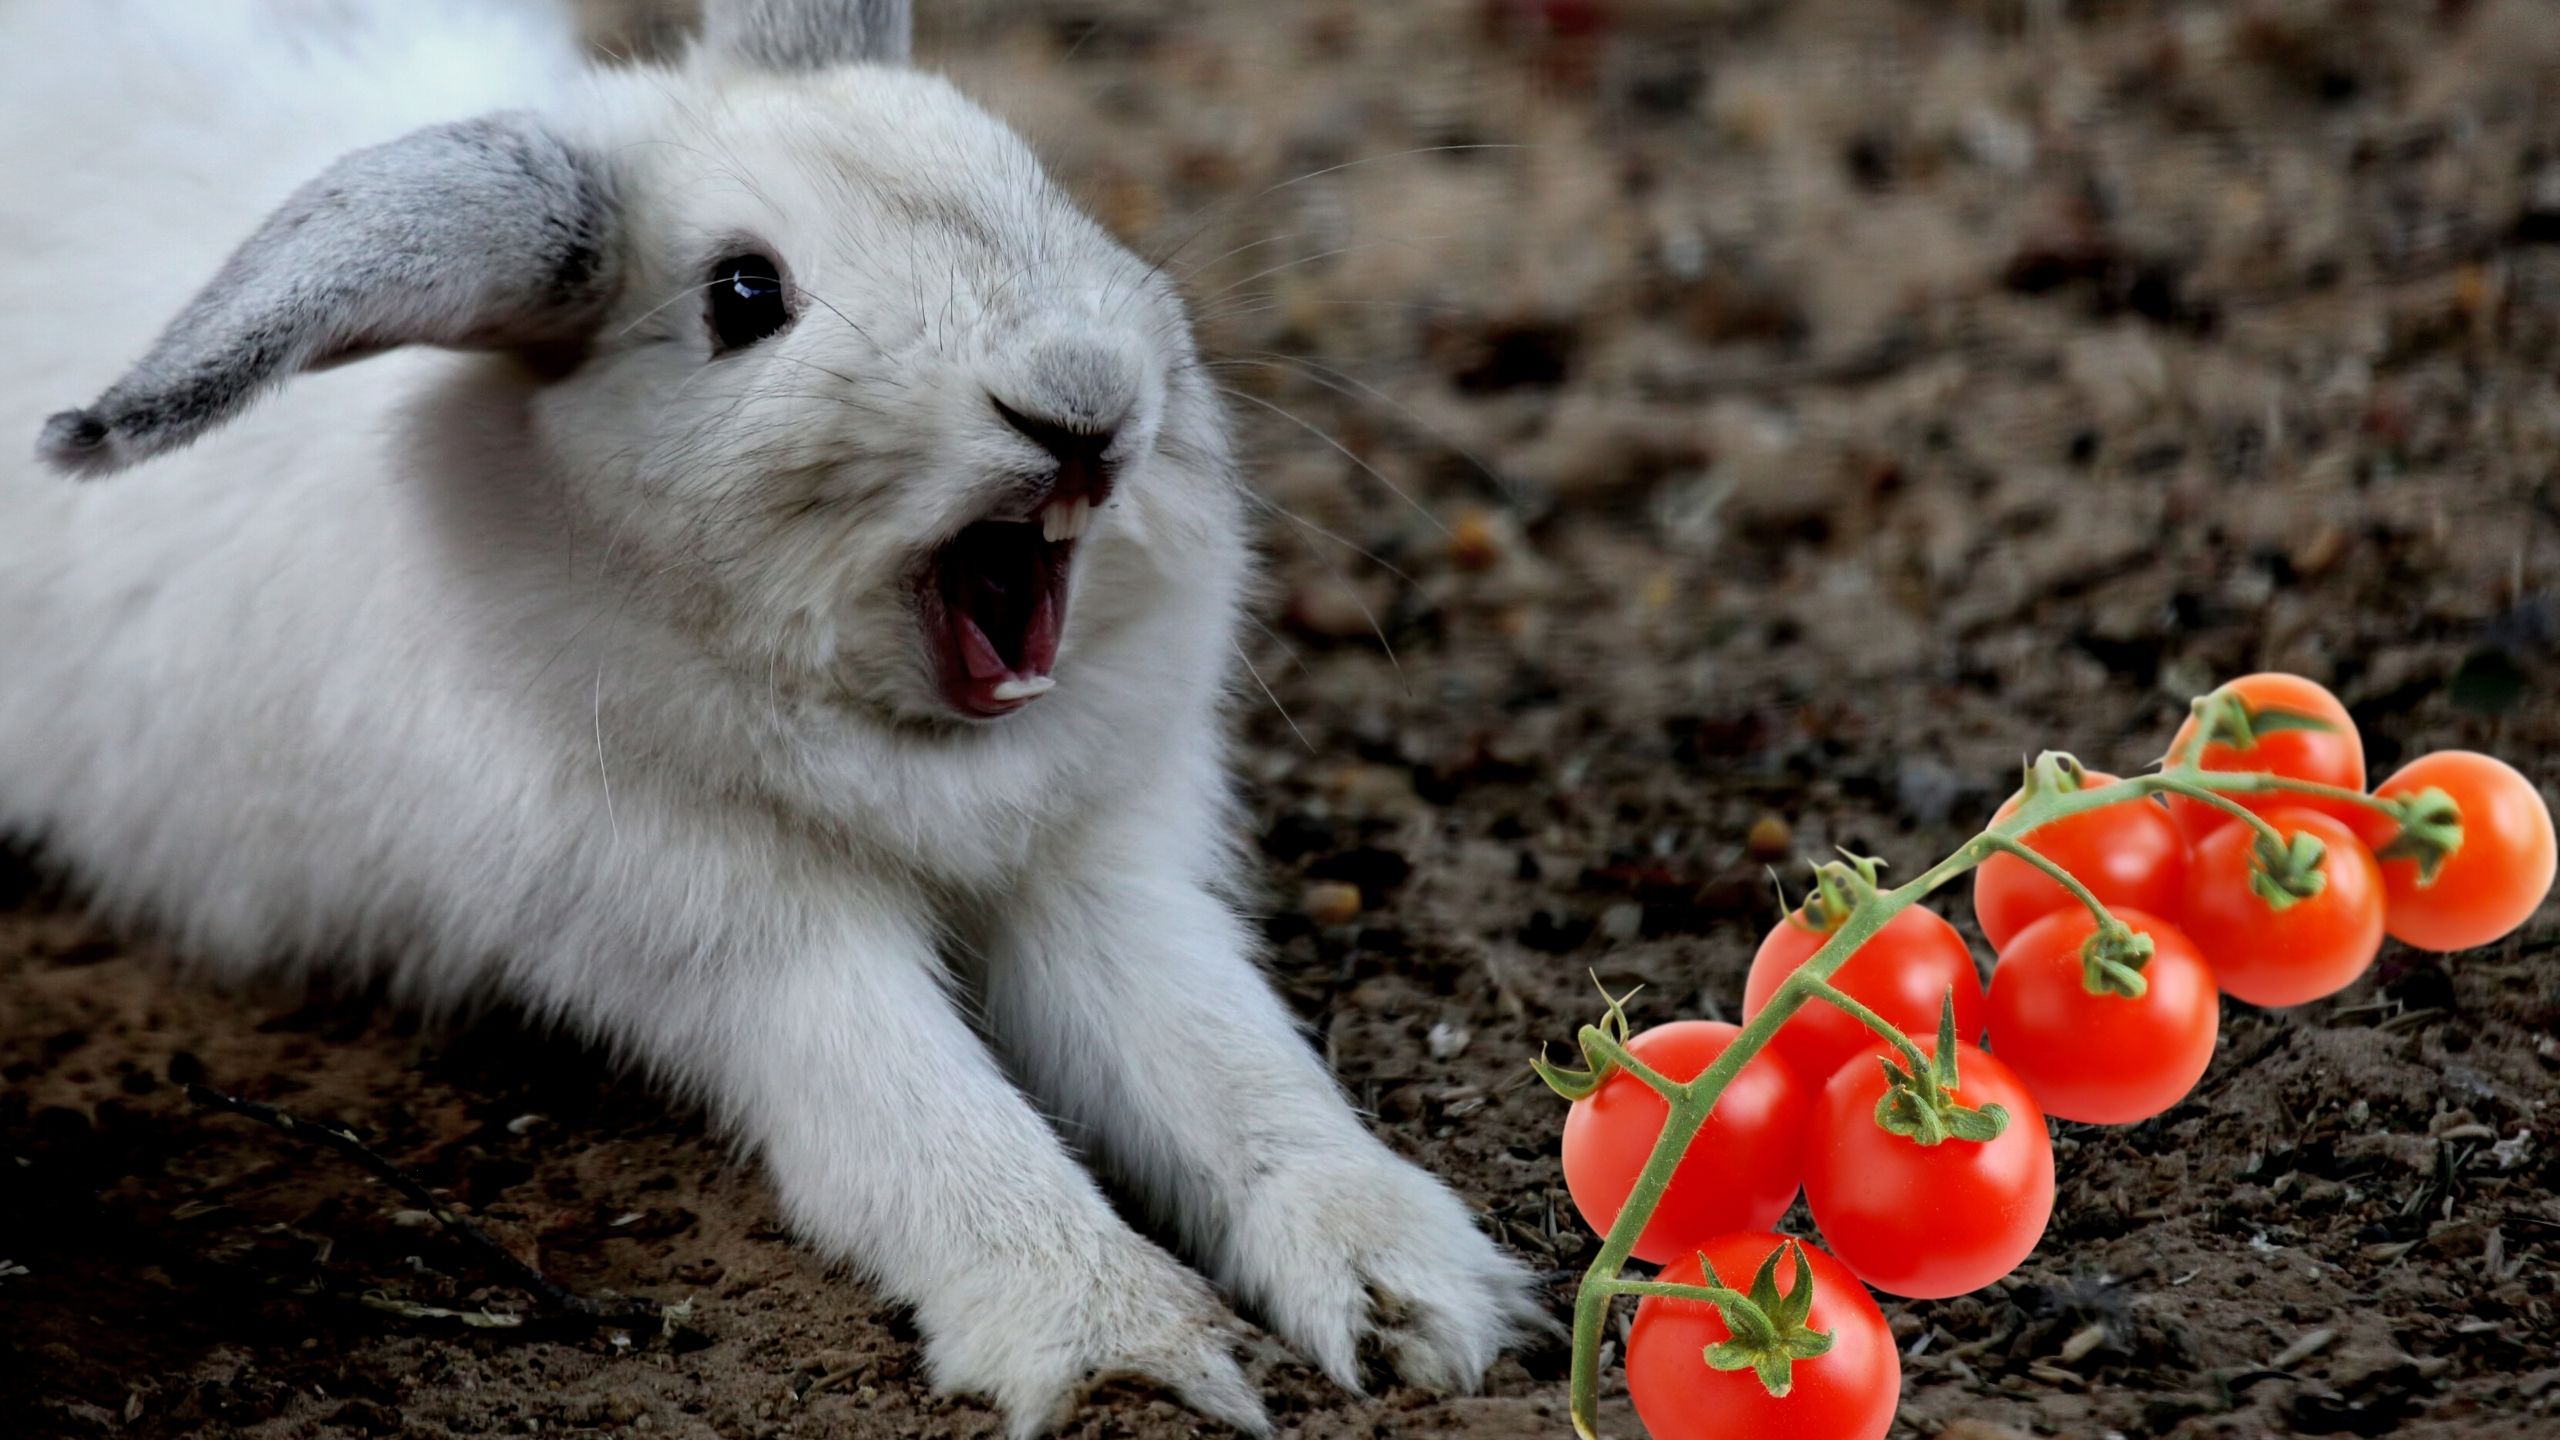 can rabbits eat tomato